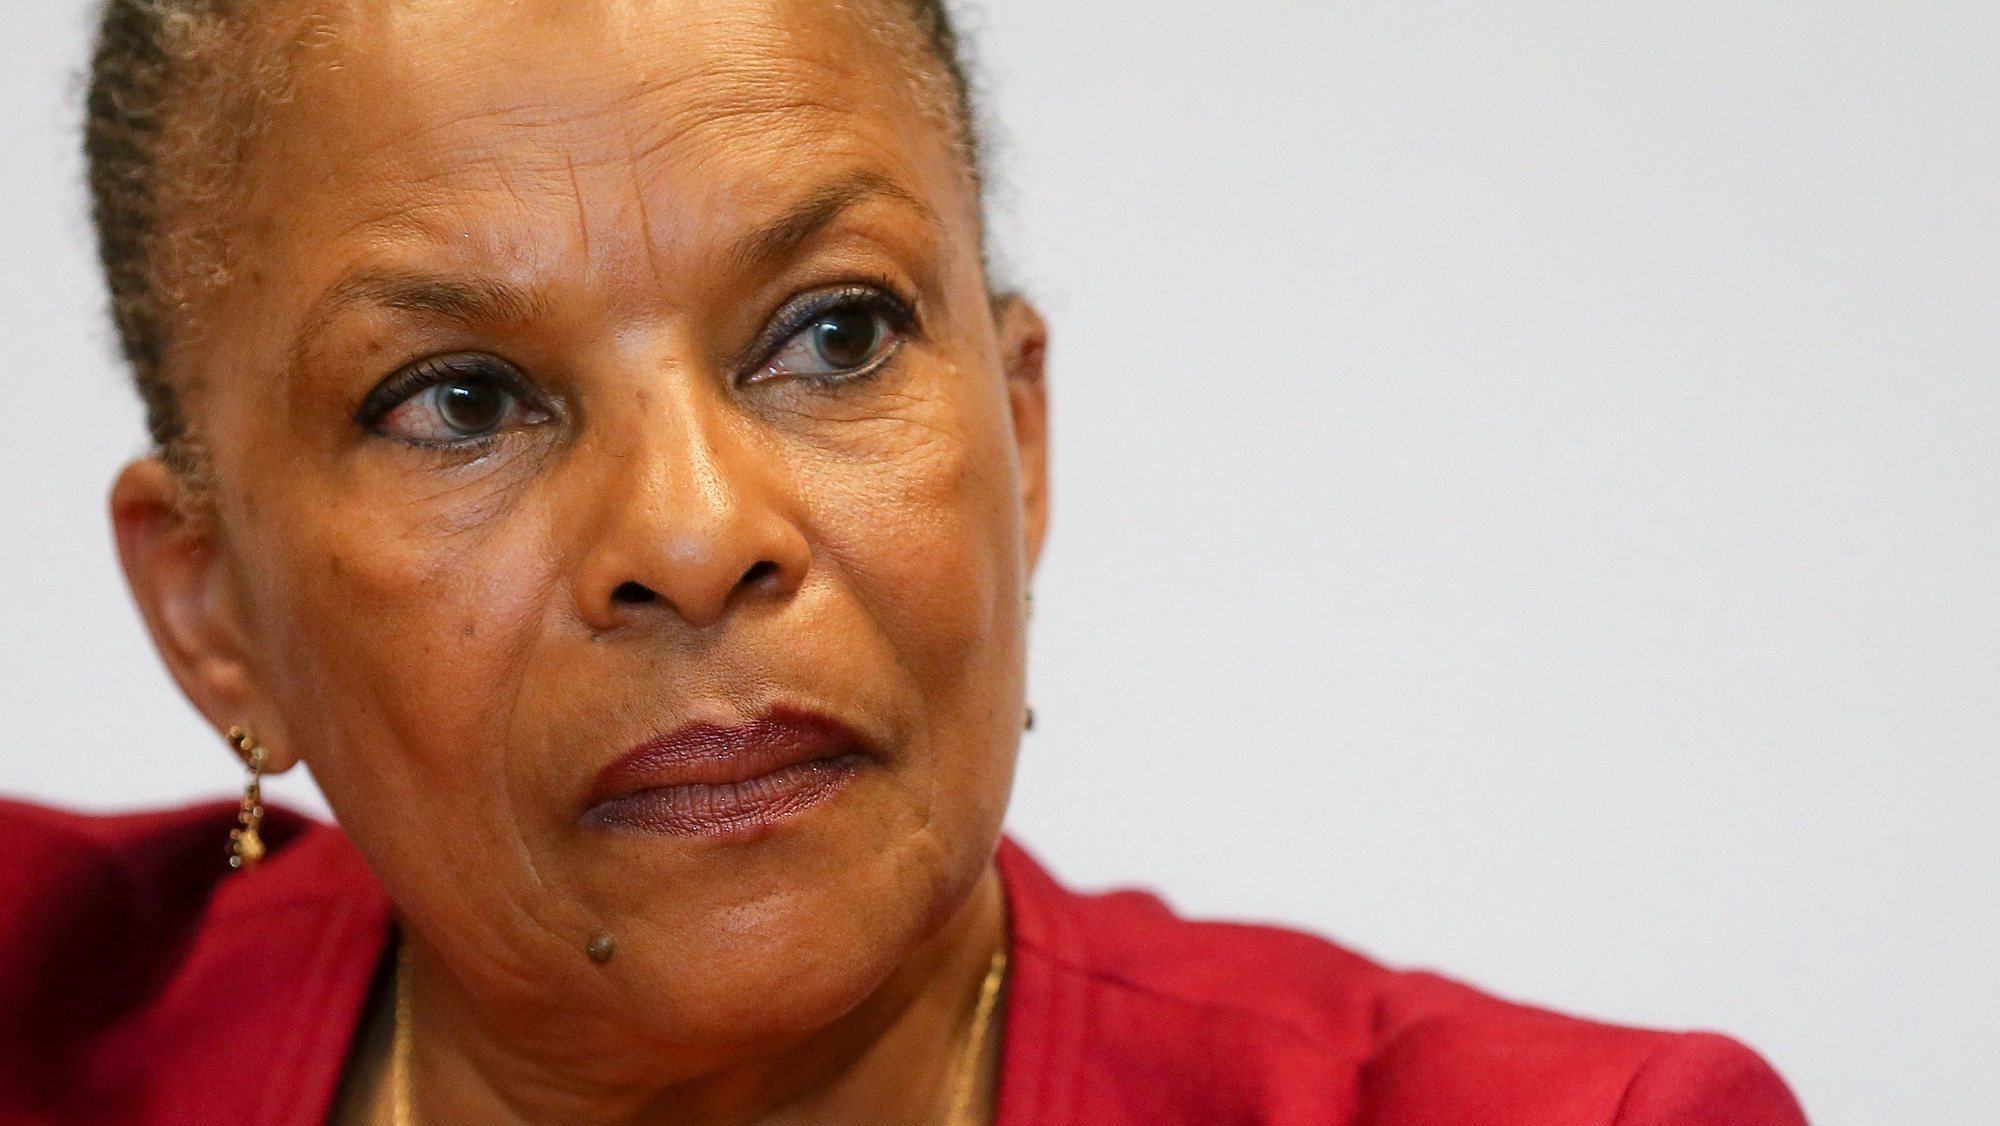 epa06694460 French former justice minister Christiane Taubira and British film director Ken Loach (unseen) attend a press conference before Loach receives a Honorary Doctor&#039;s insignia and becomes a full member of the Free University of Brussels (ULB) community, in Brussels, Belgium, 26 April 2018. Loach receives the Dr. Honoris Causa&#039;s degree despite complaints from Jewish groups that he allegedly holds anti-Semitic views. The 81-year-old filmmaker has denied the anti-Semitism allegations.  EPA/STEPHANIE LECOCQ